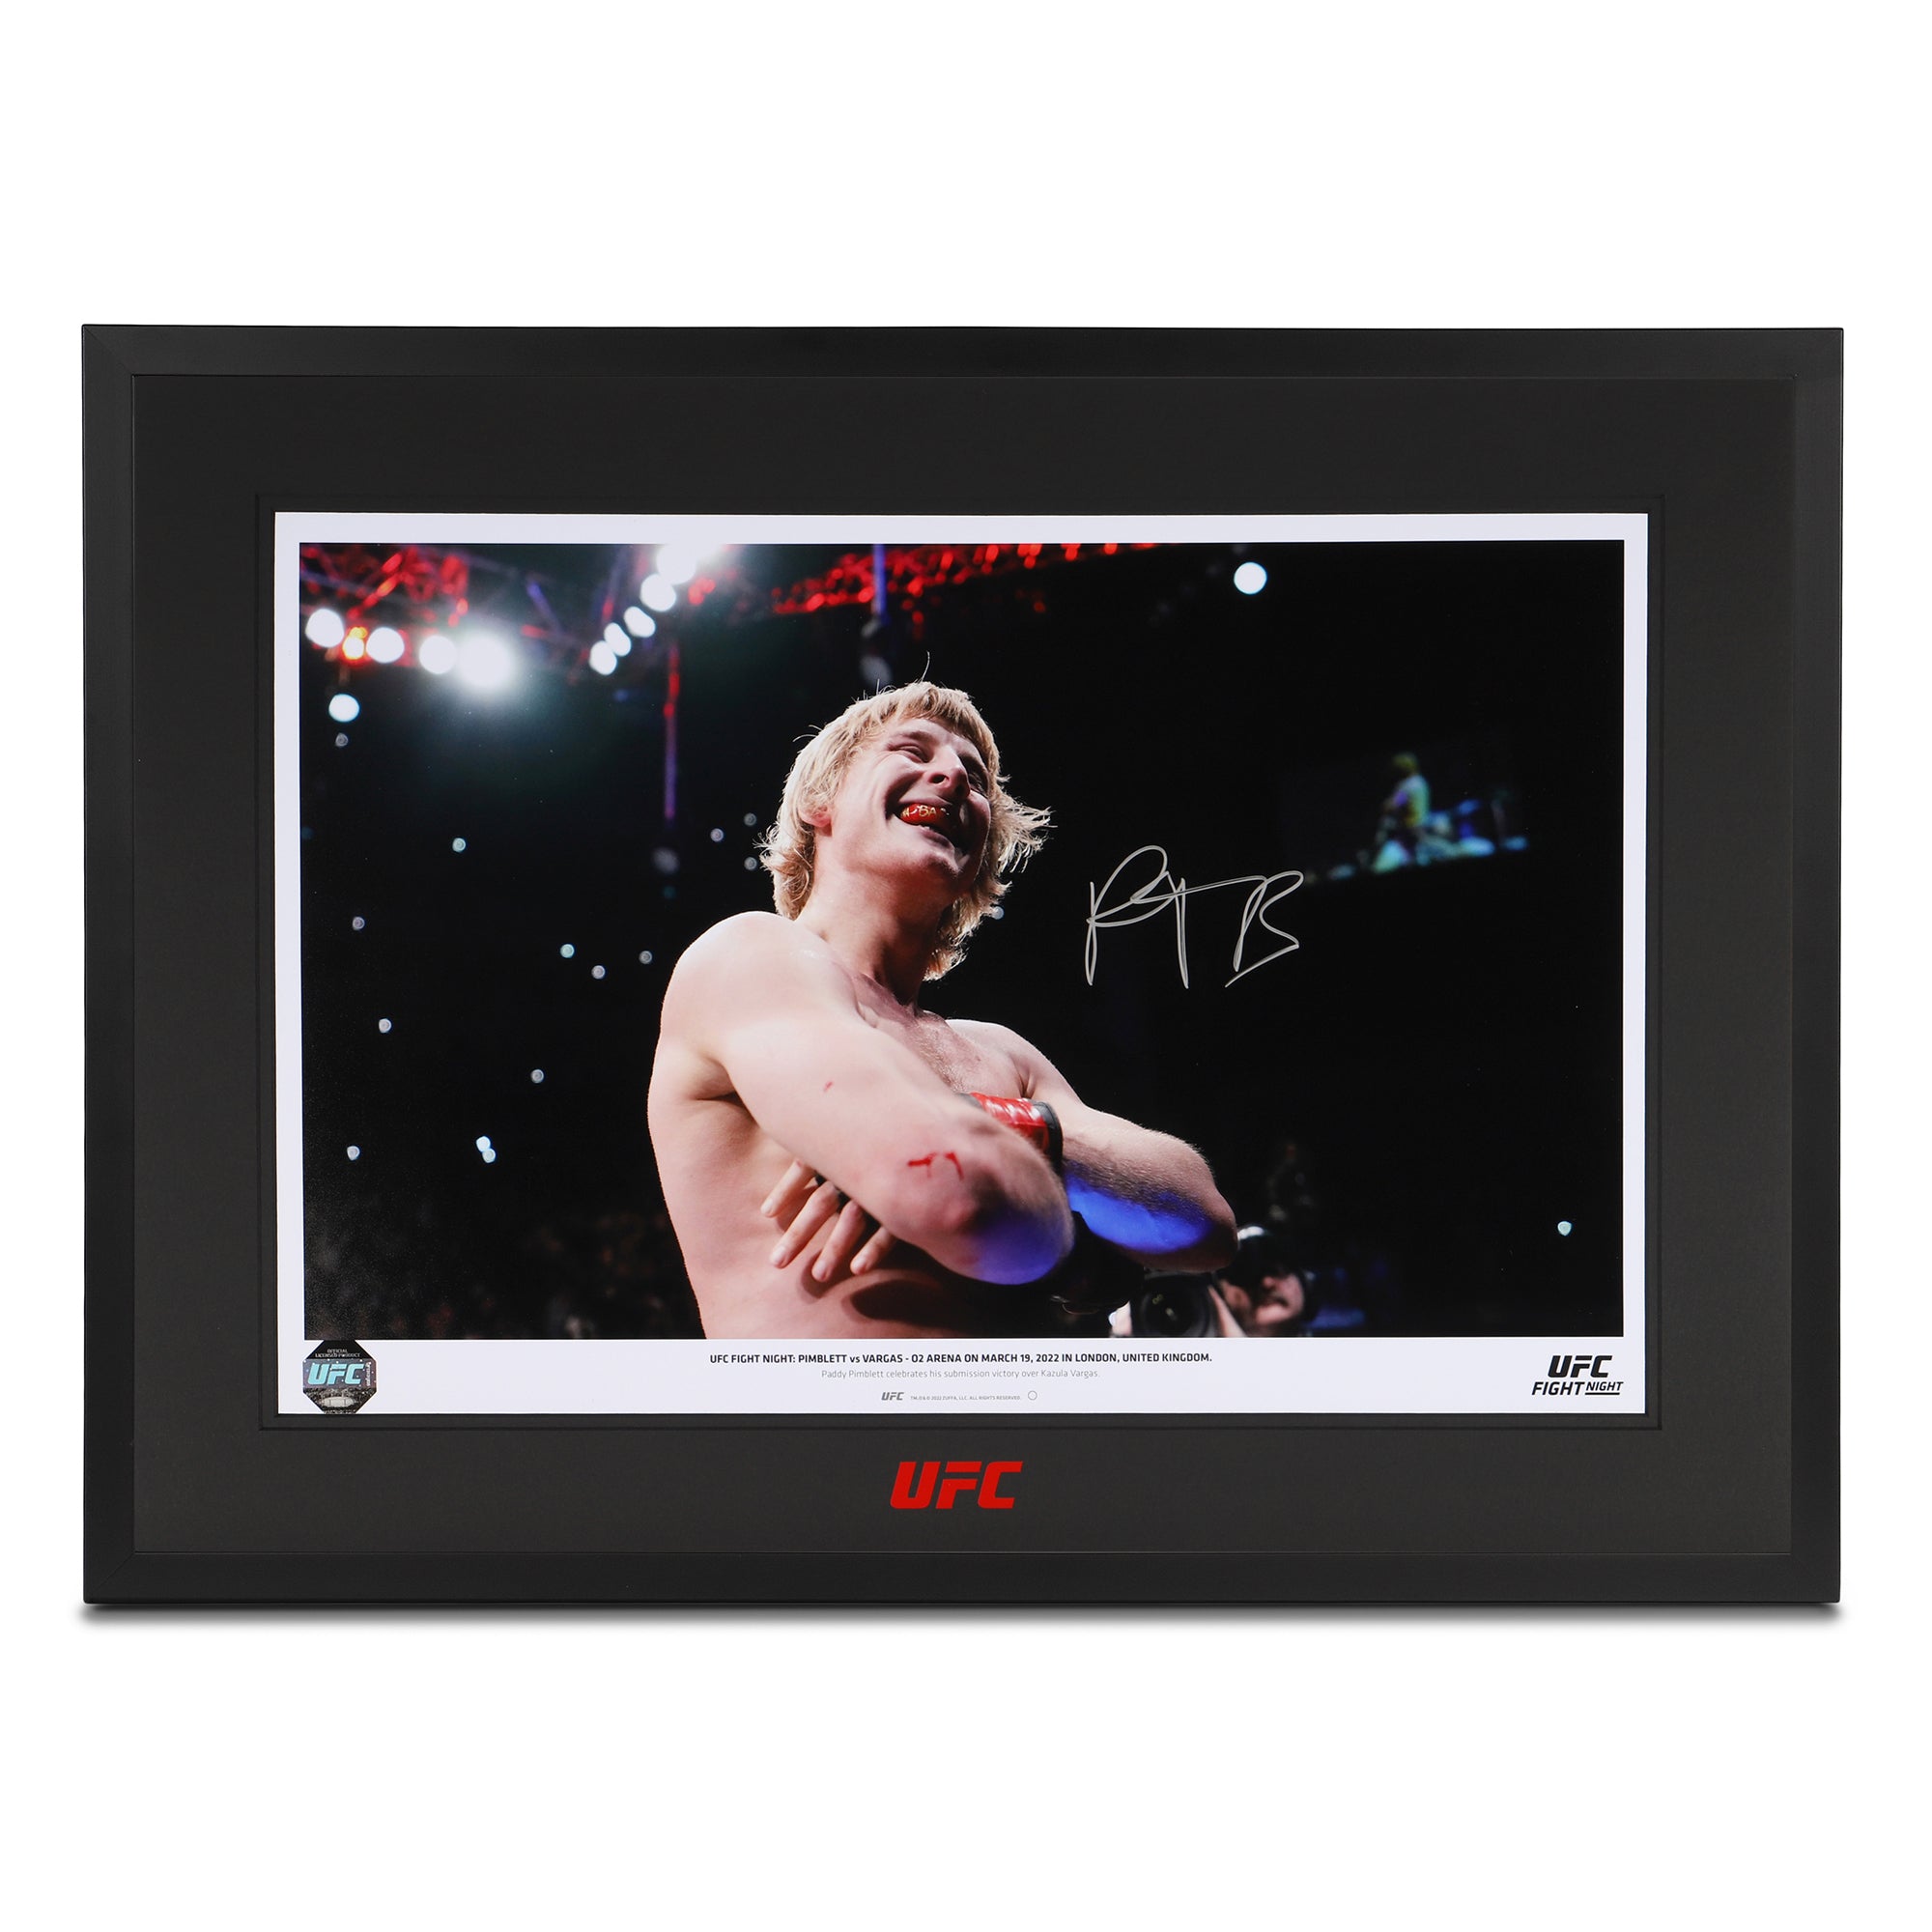 Official Paddy Pimblett signed photo